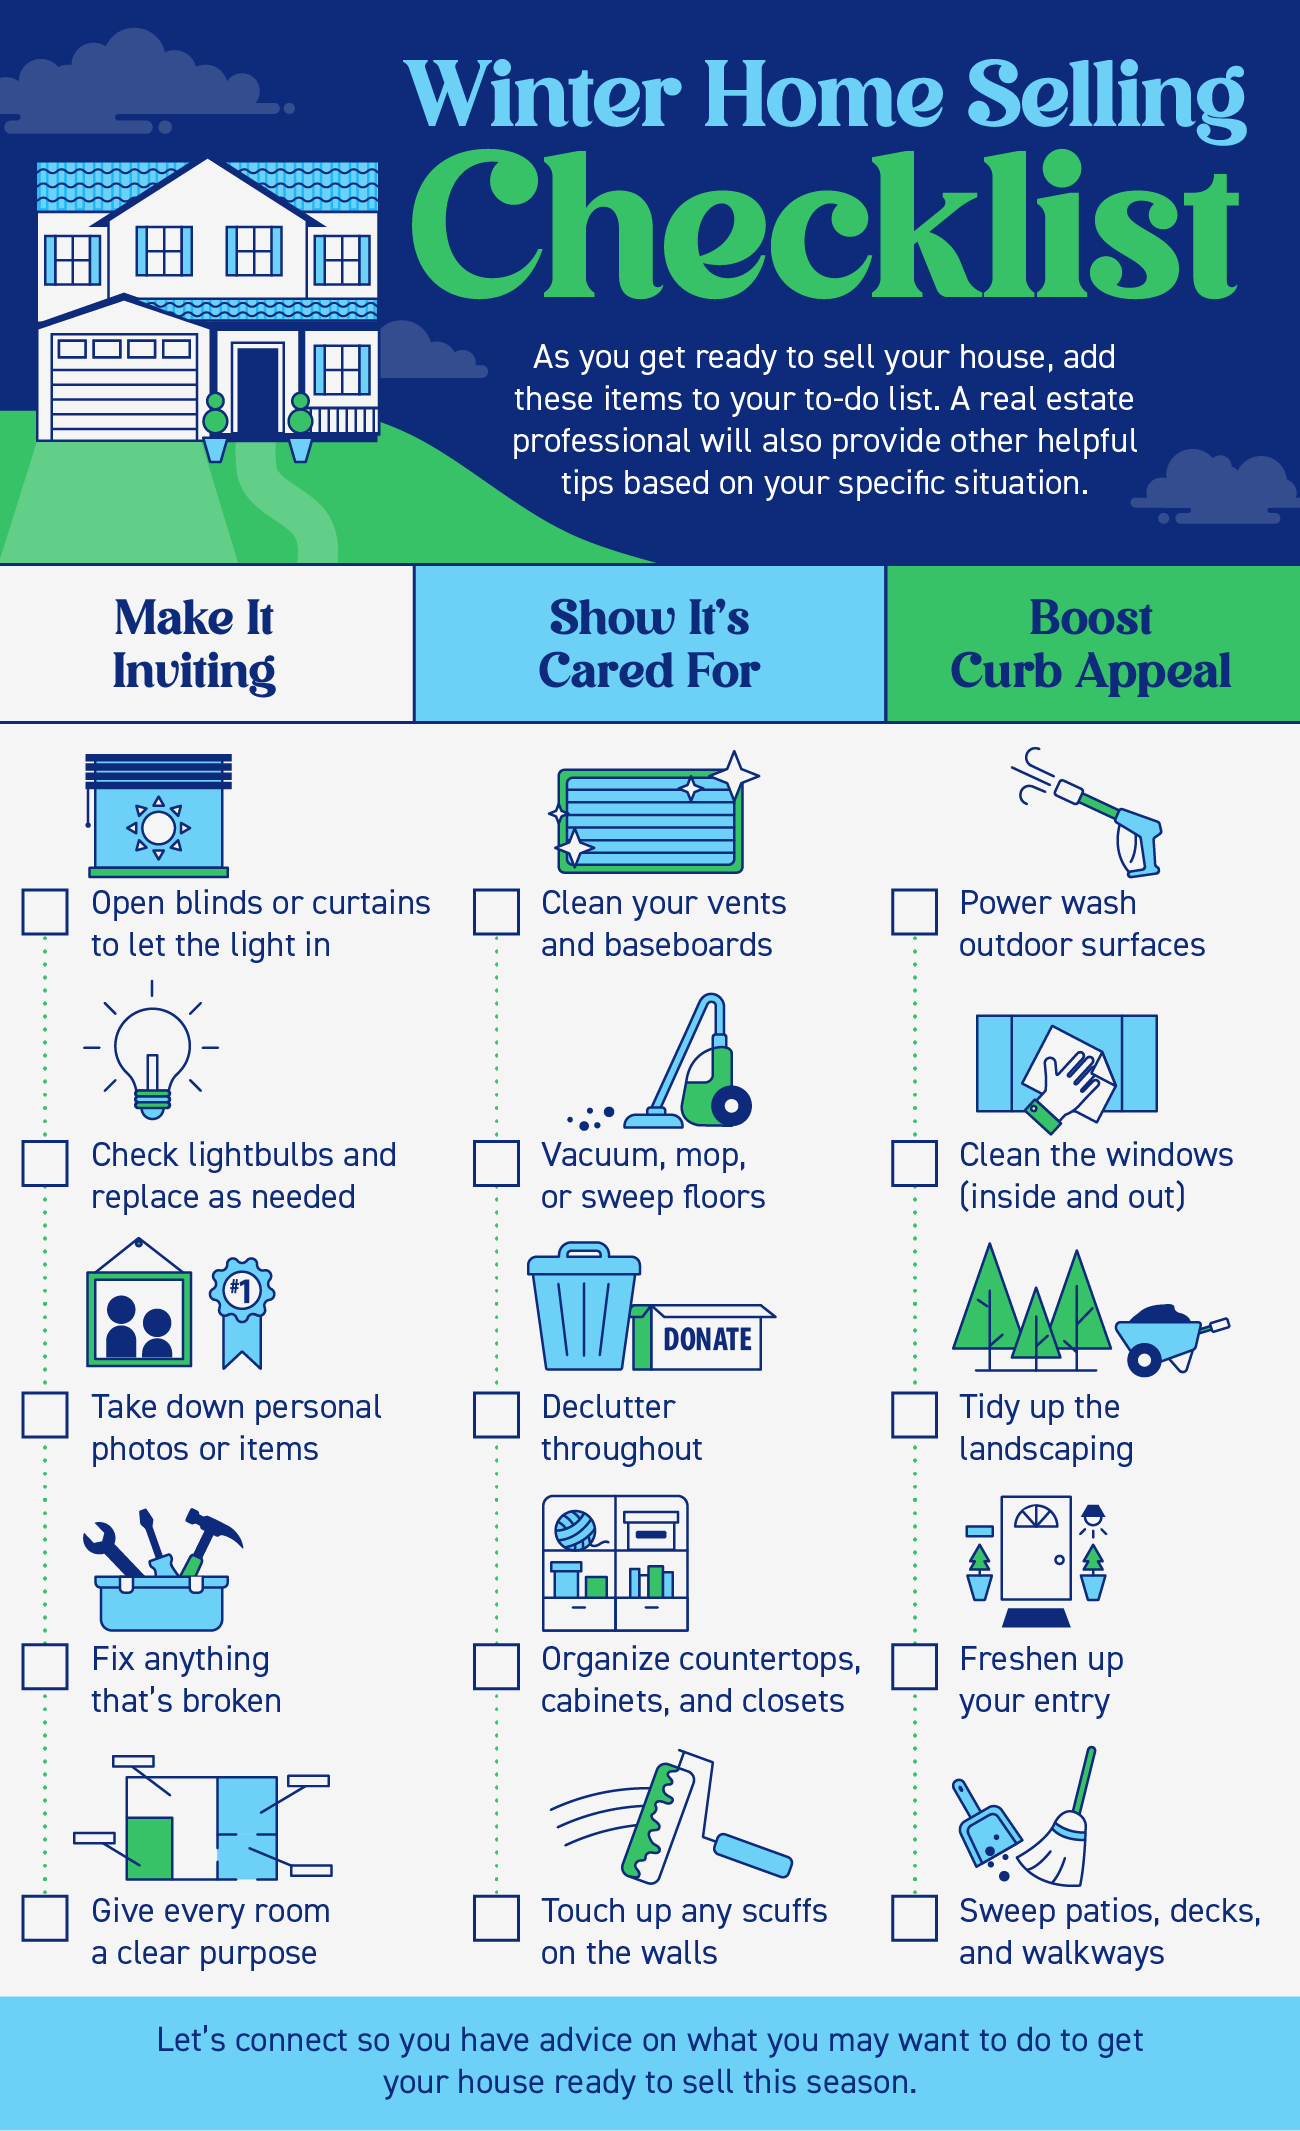 Winter Home Selling Checklist - KM Realty Group LLC, Chicago